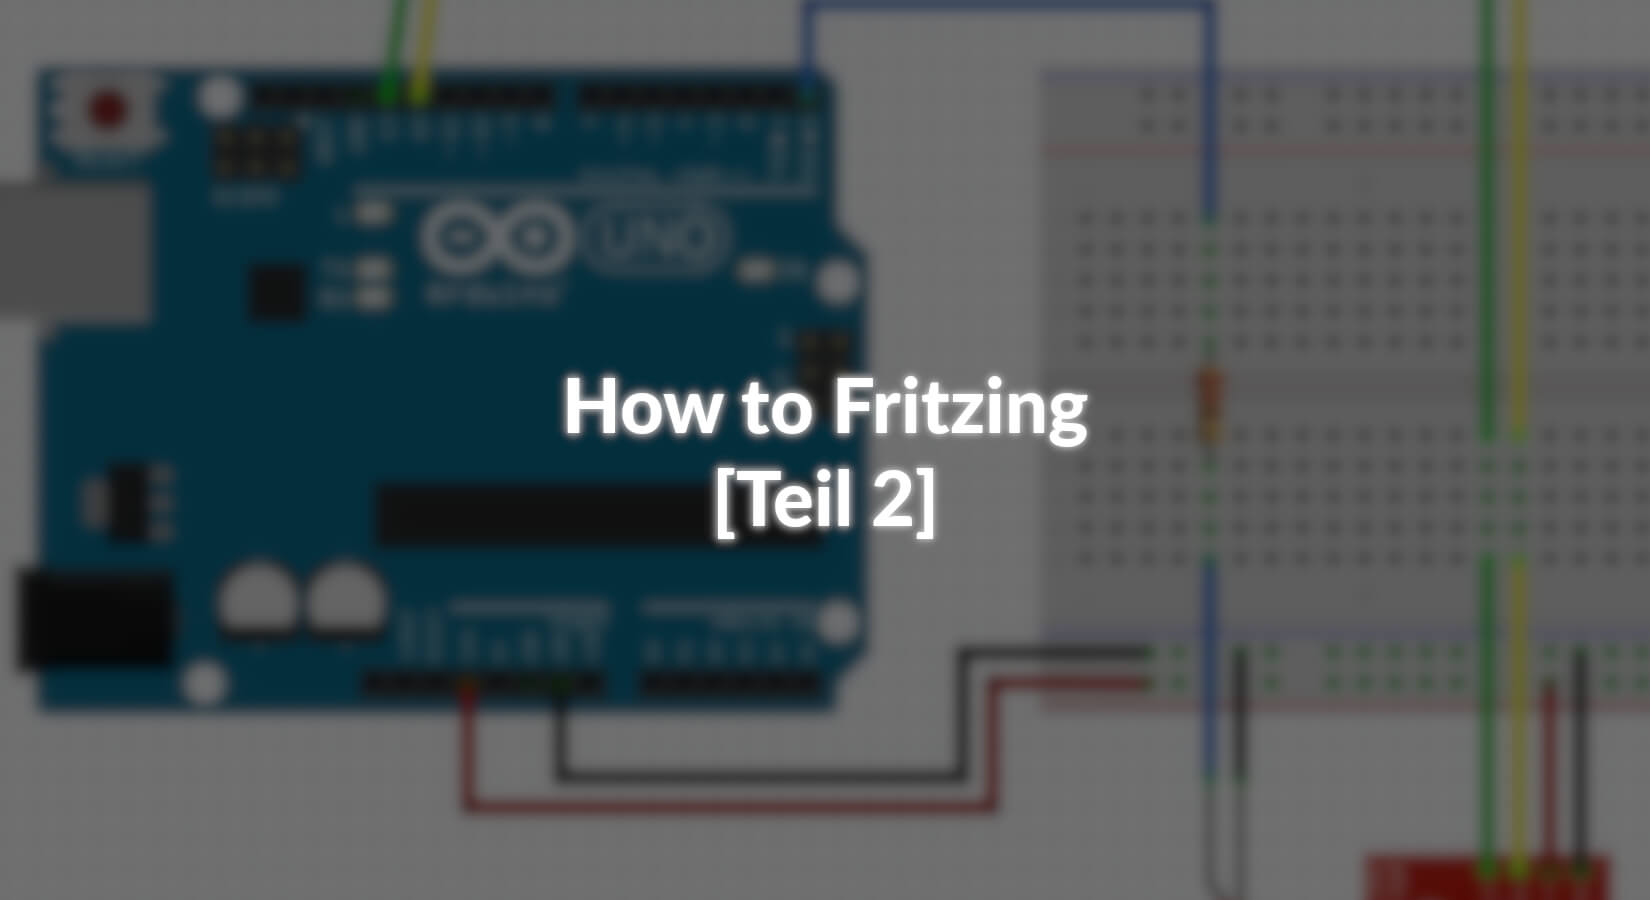 How to Fritzing - [Teil 2] - AZ-Delivery